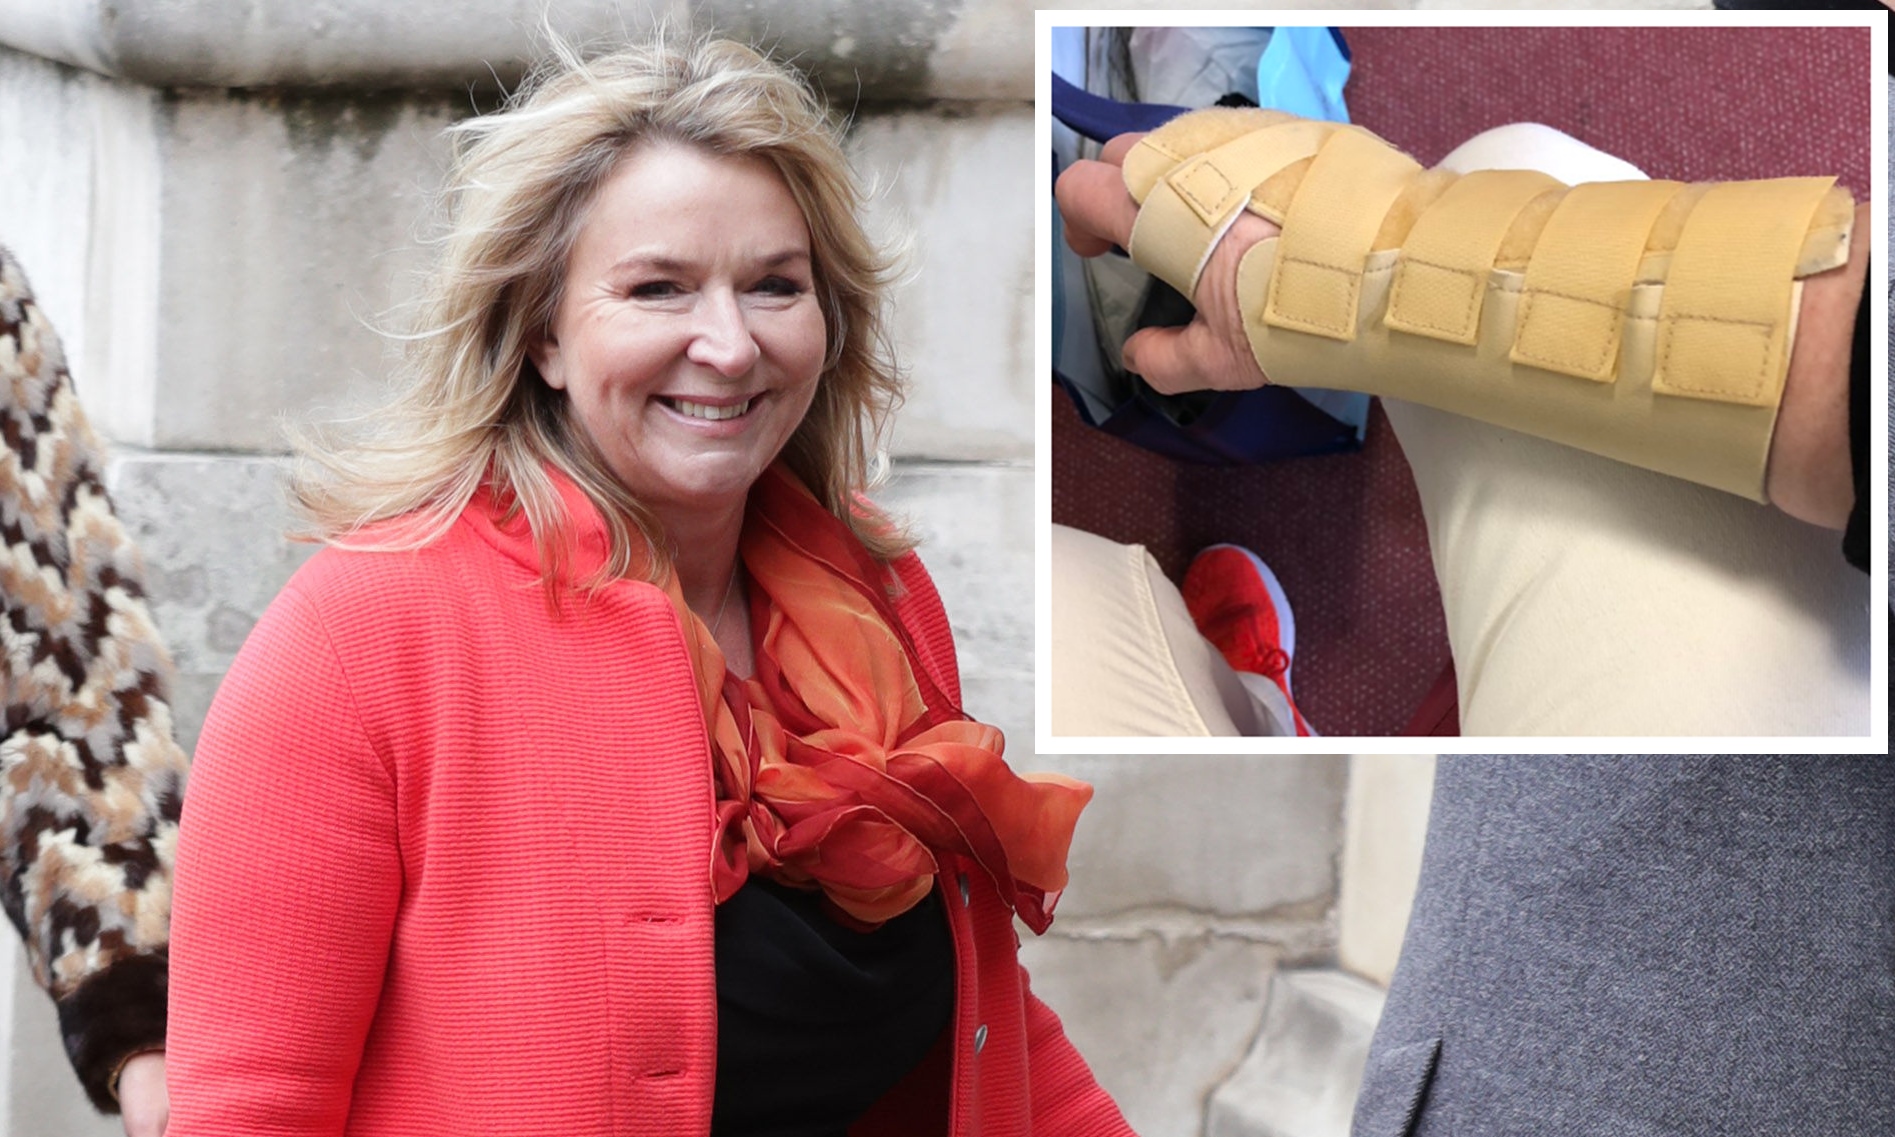 Fern Britton and (inset) a photo she posted of her sore arm.